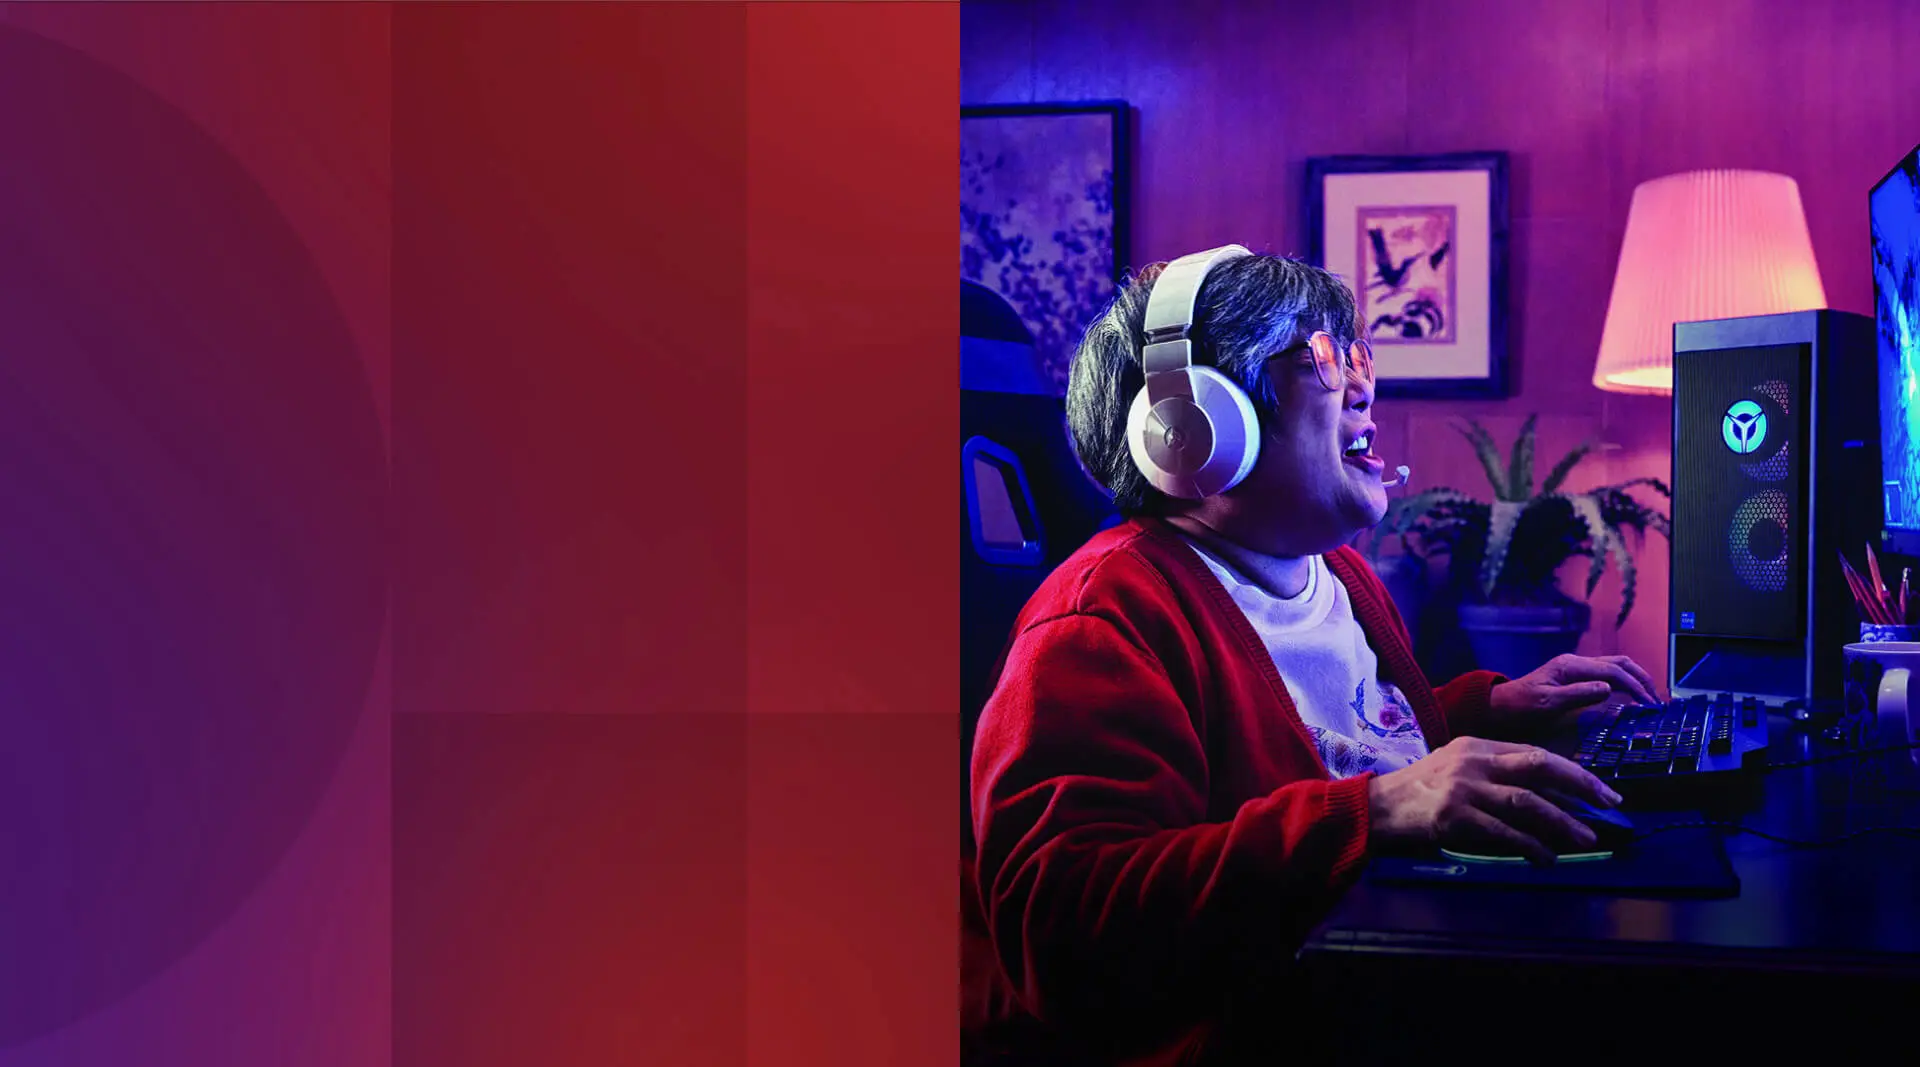 In a violet-lit room, a woman with salt-and-pepper hair, glasses, and a big gaming headset engages her keyboard and mouse as she plays a computer game. Papers, a coffee cup, and a container of writing utensils also occupy the desk.